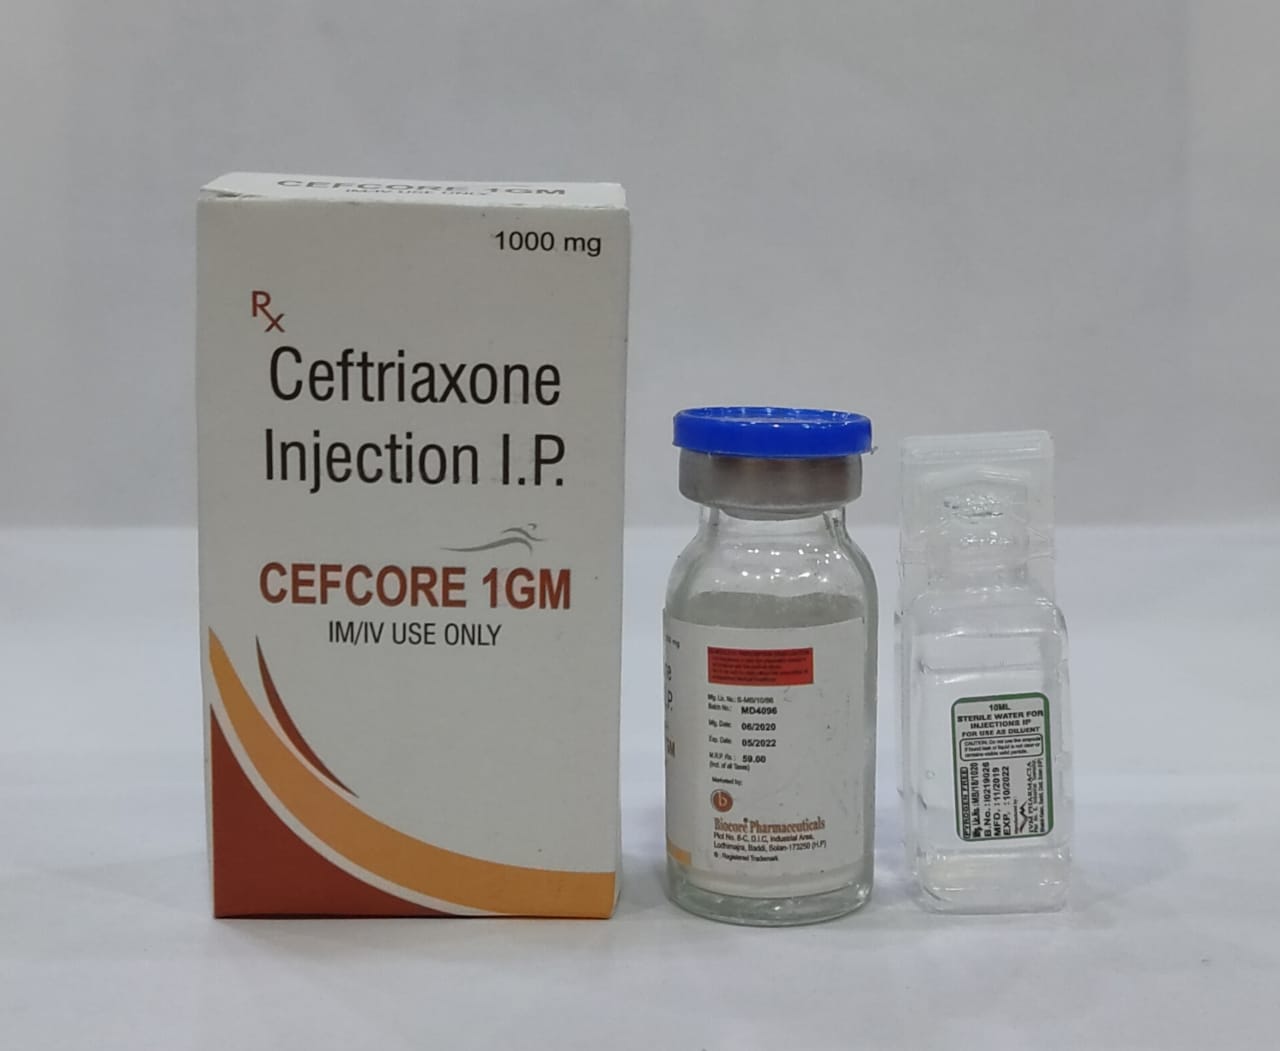 CEFCORE-1GM Injection